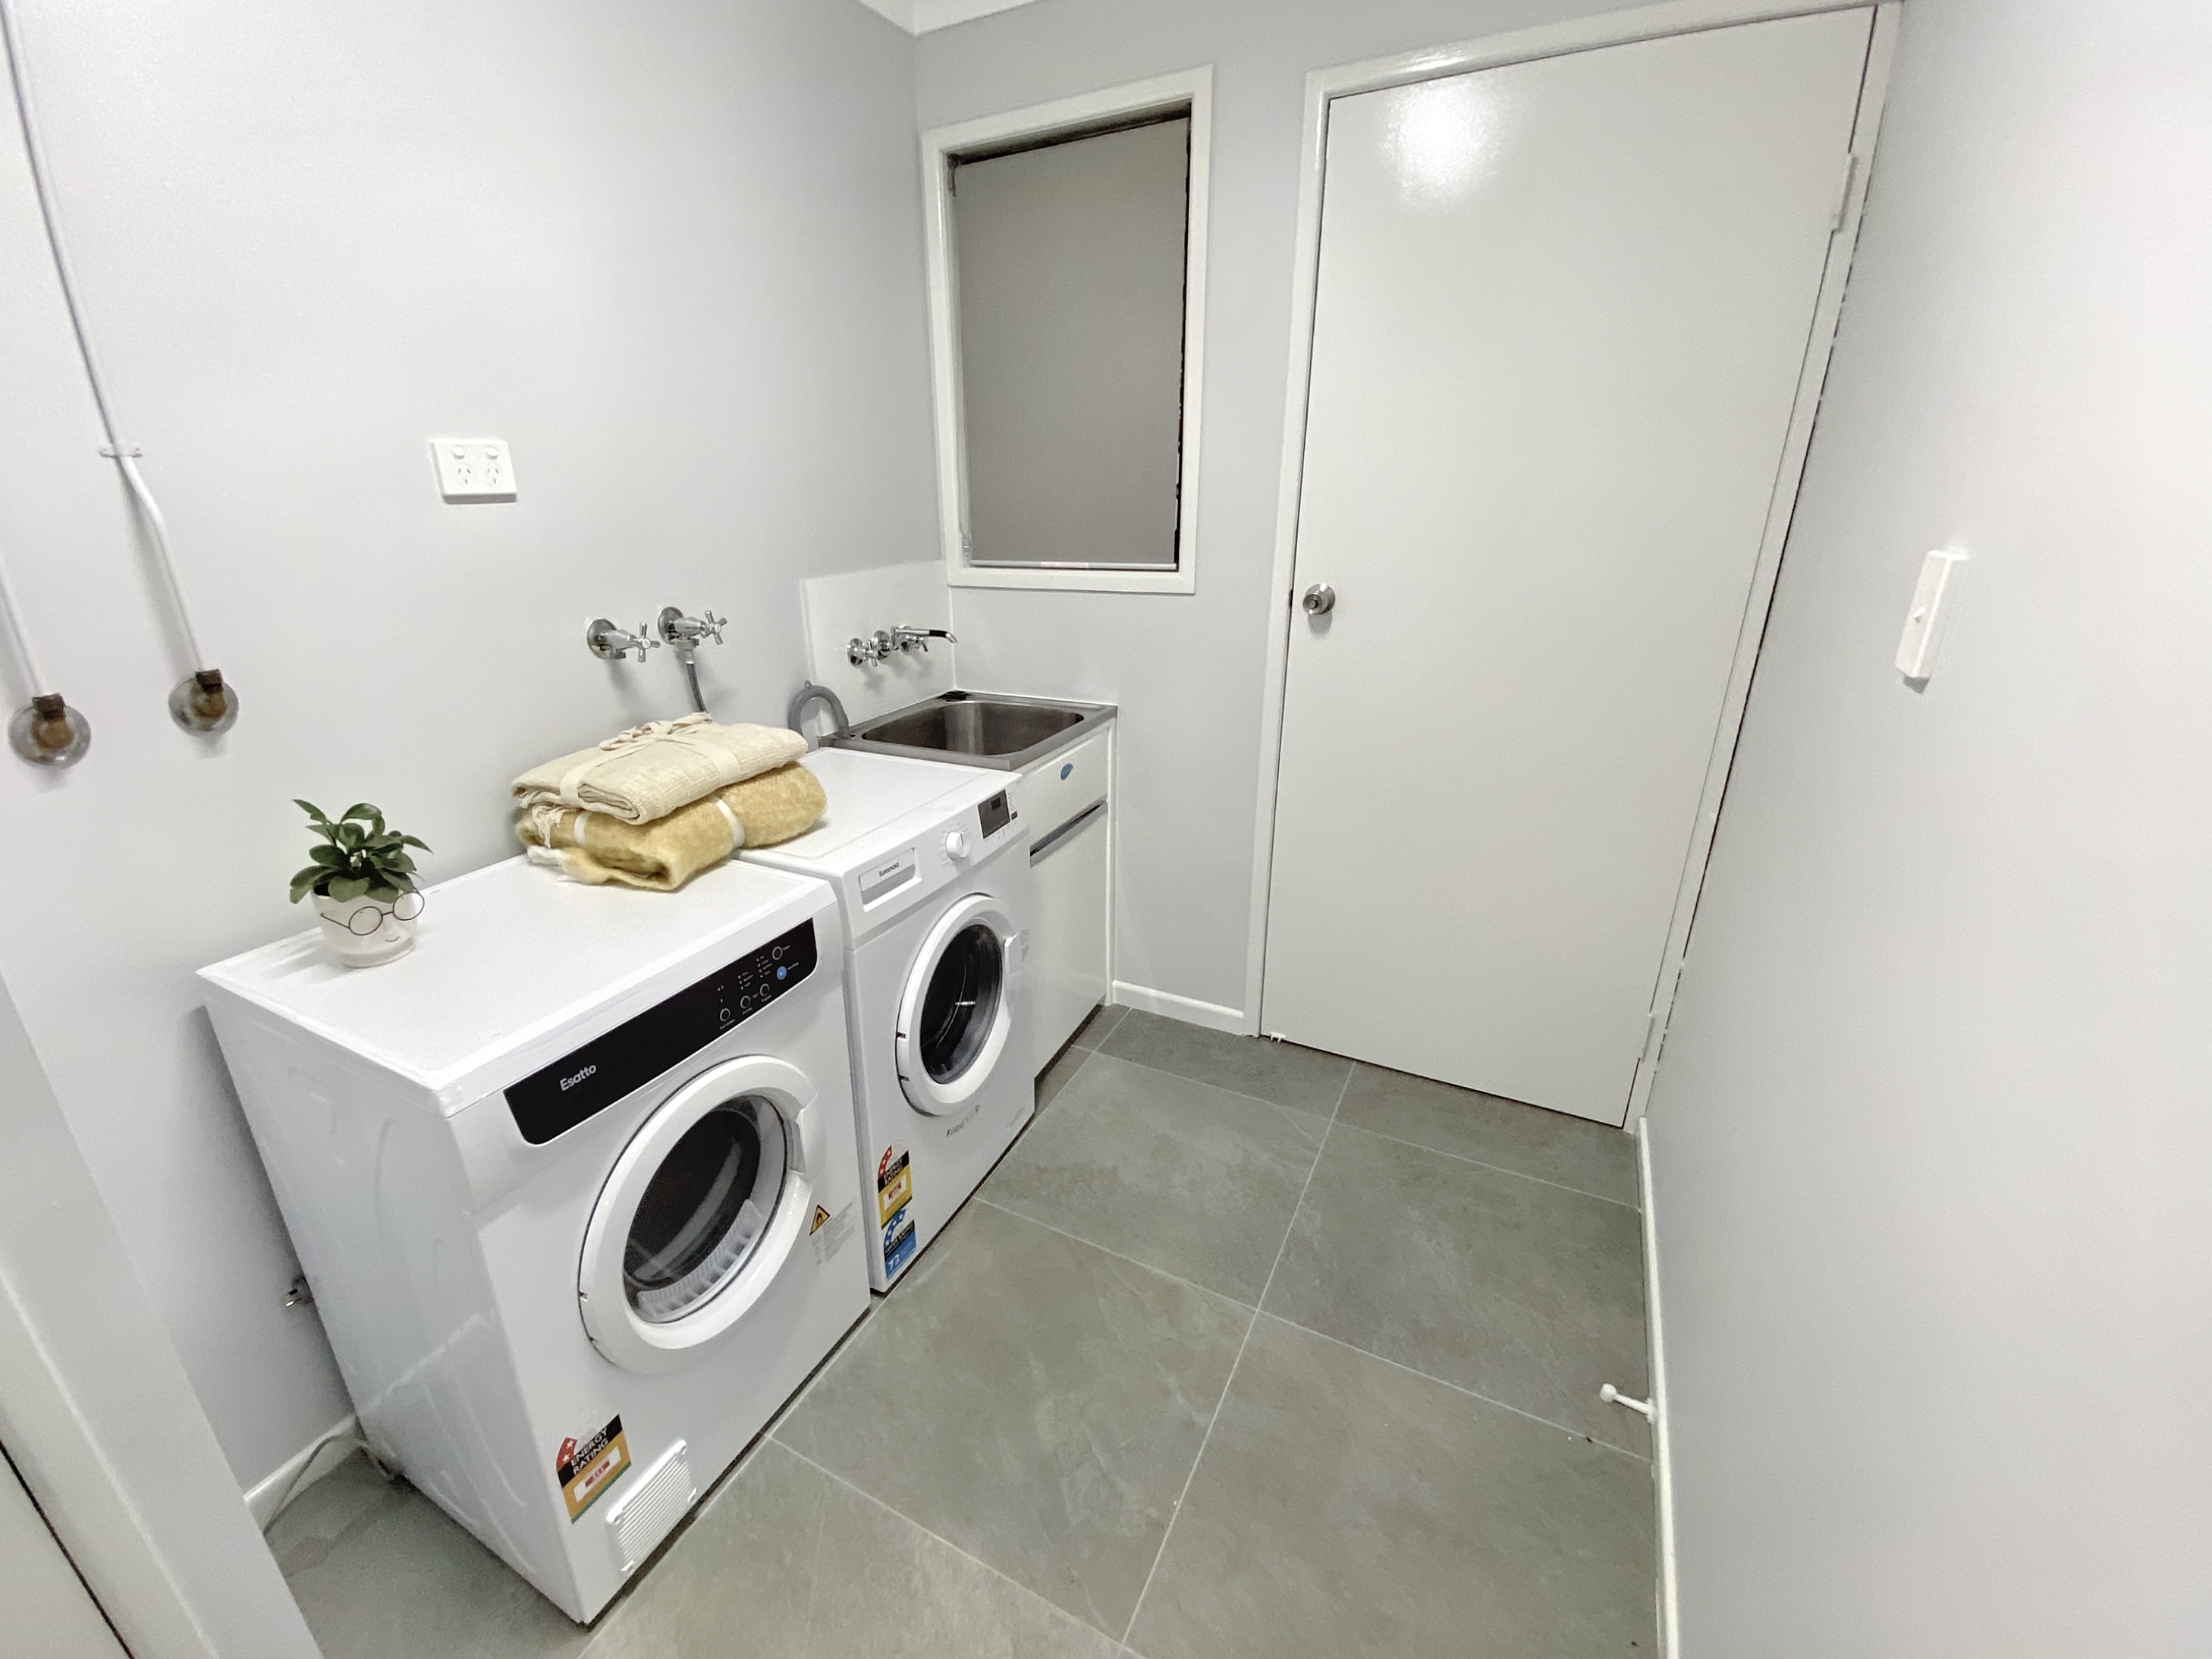 Laundry with a washing machine, clothes dryer and laundry basin..